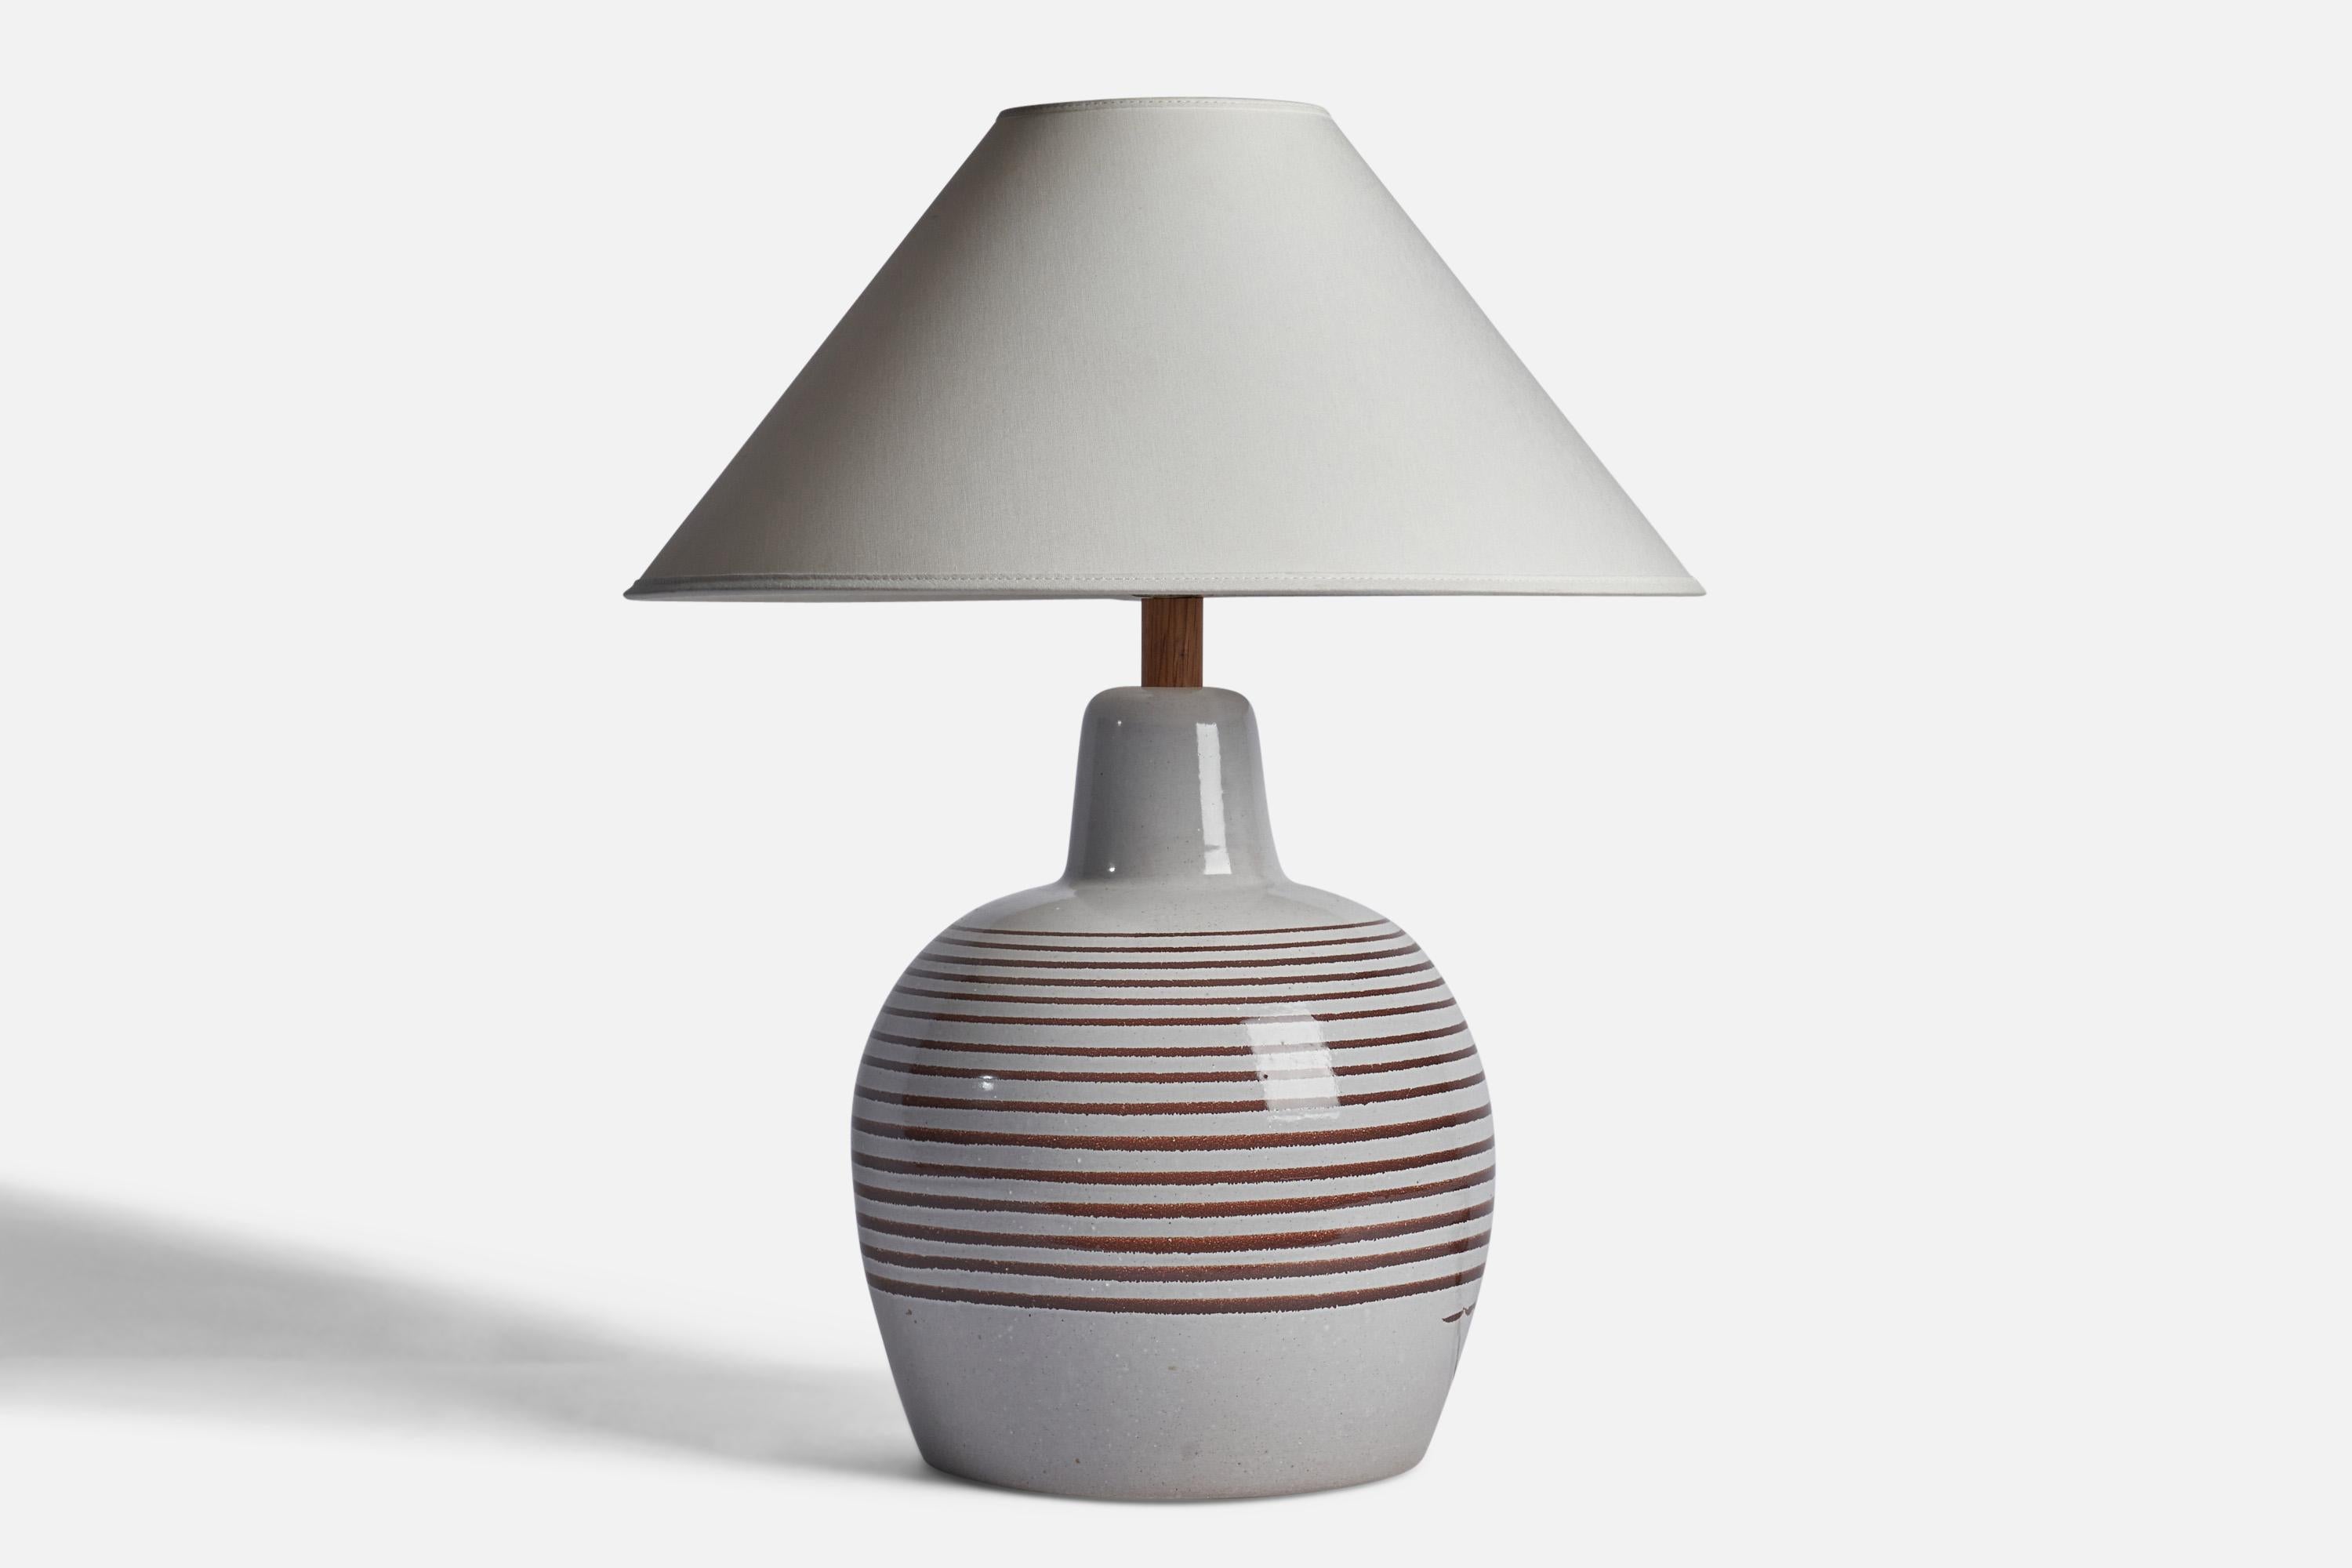 A light grey and brown-glazed ceramic and walnut table lamp designed by Jane & Gordon Martz and produced by Marshall Studios, USA, 1960s.

Dimensions of Lamp (inches): 16” H x 10” Diameter
Dimensions of Shade (inches): 4.5” Top Diameter x 15.75”